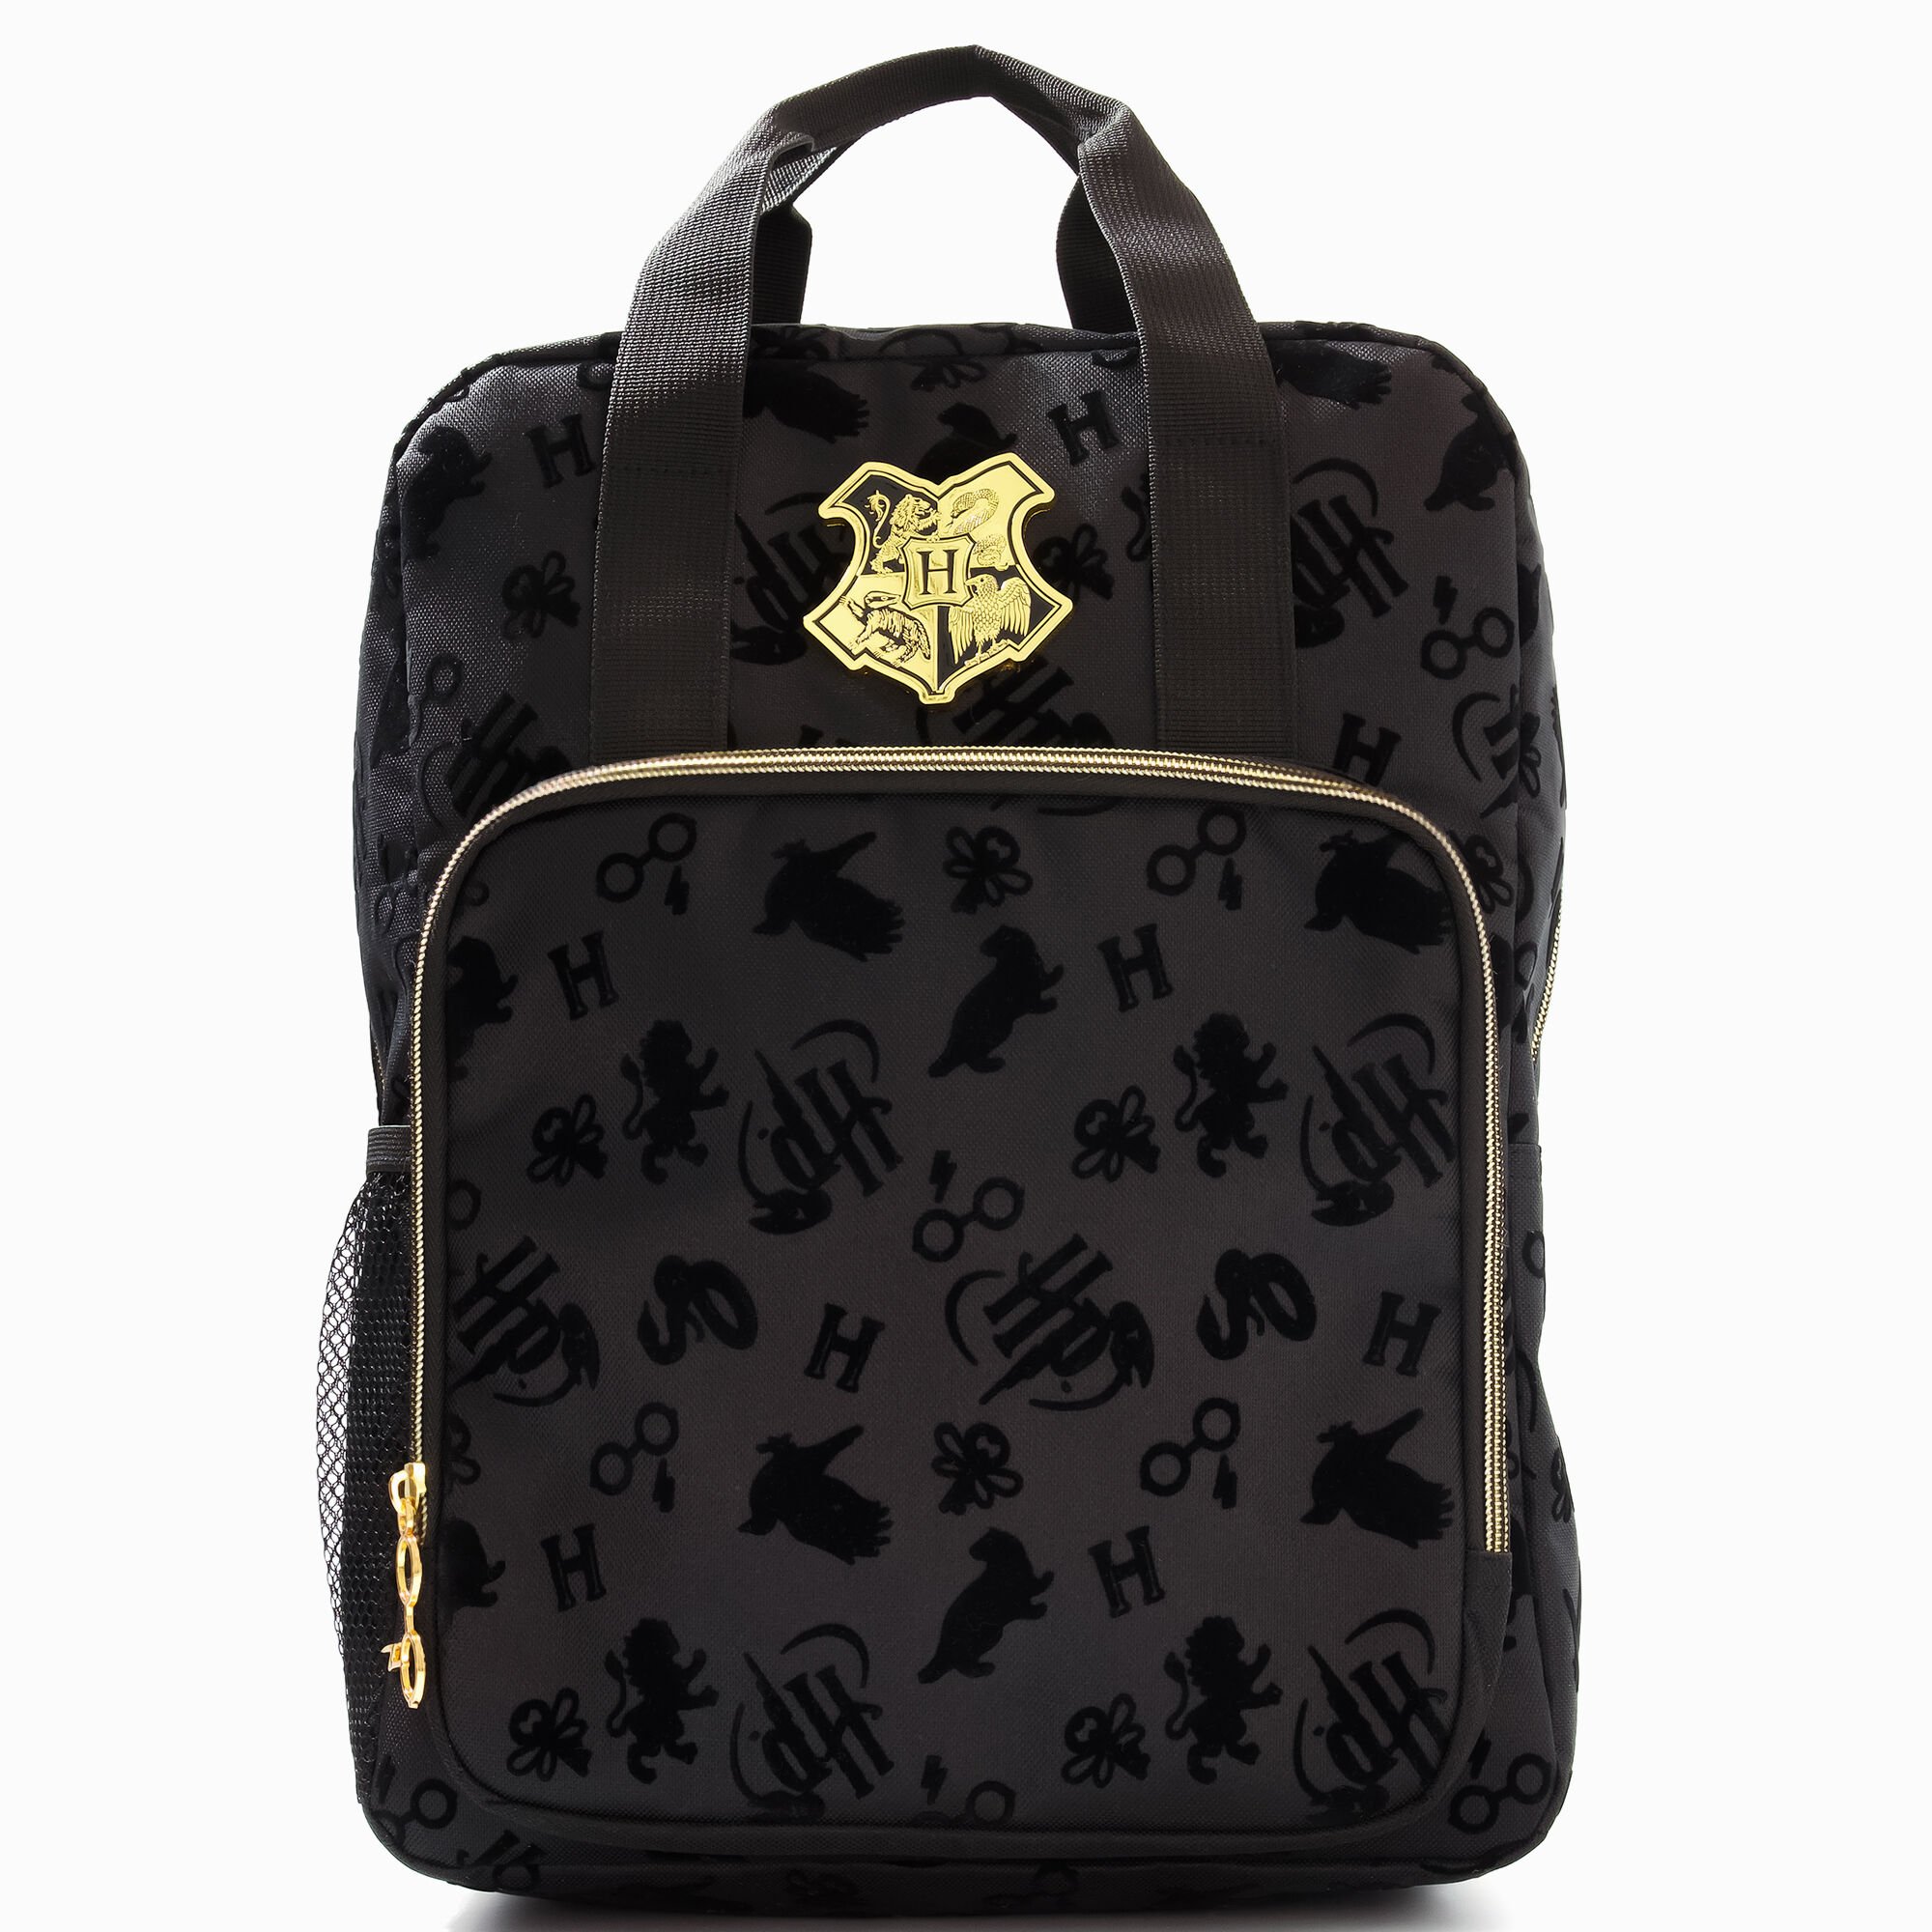 View Claires Harry Potter And Gold Backpack Black information